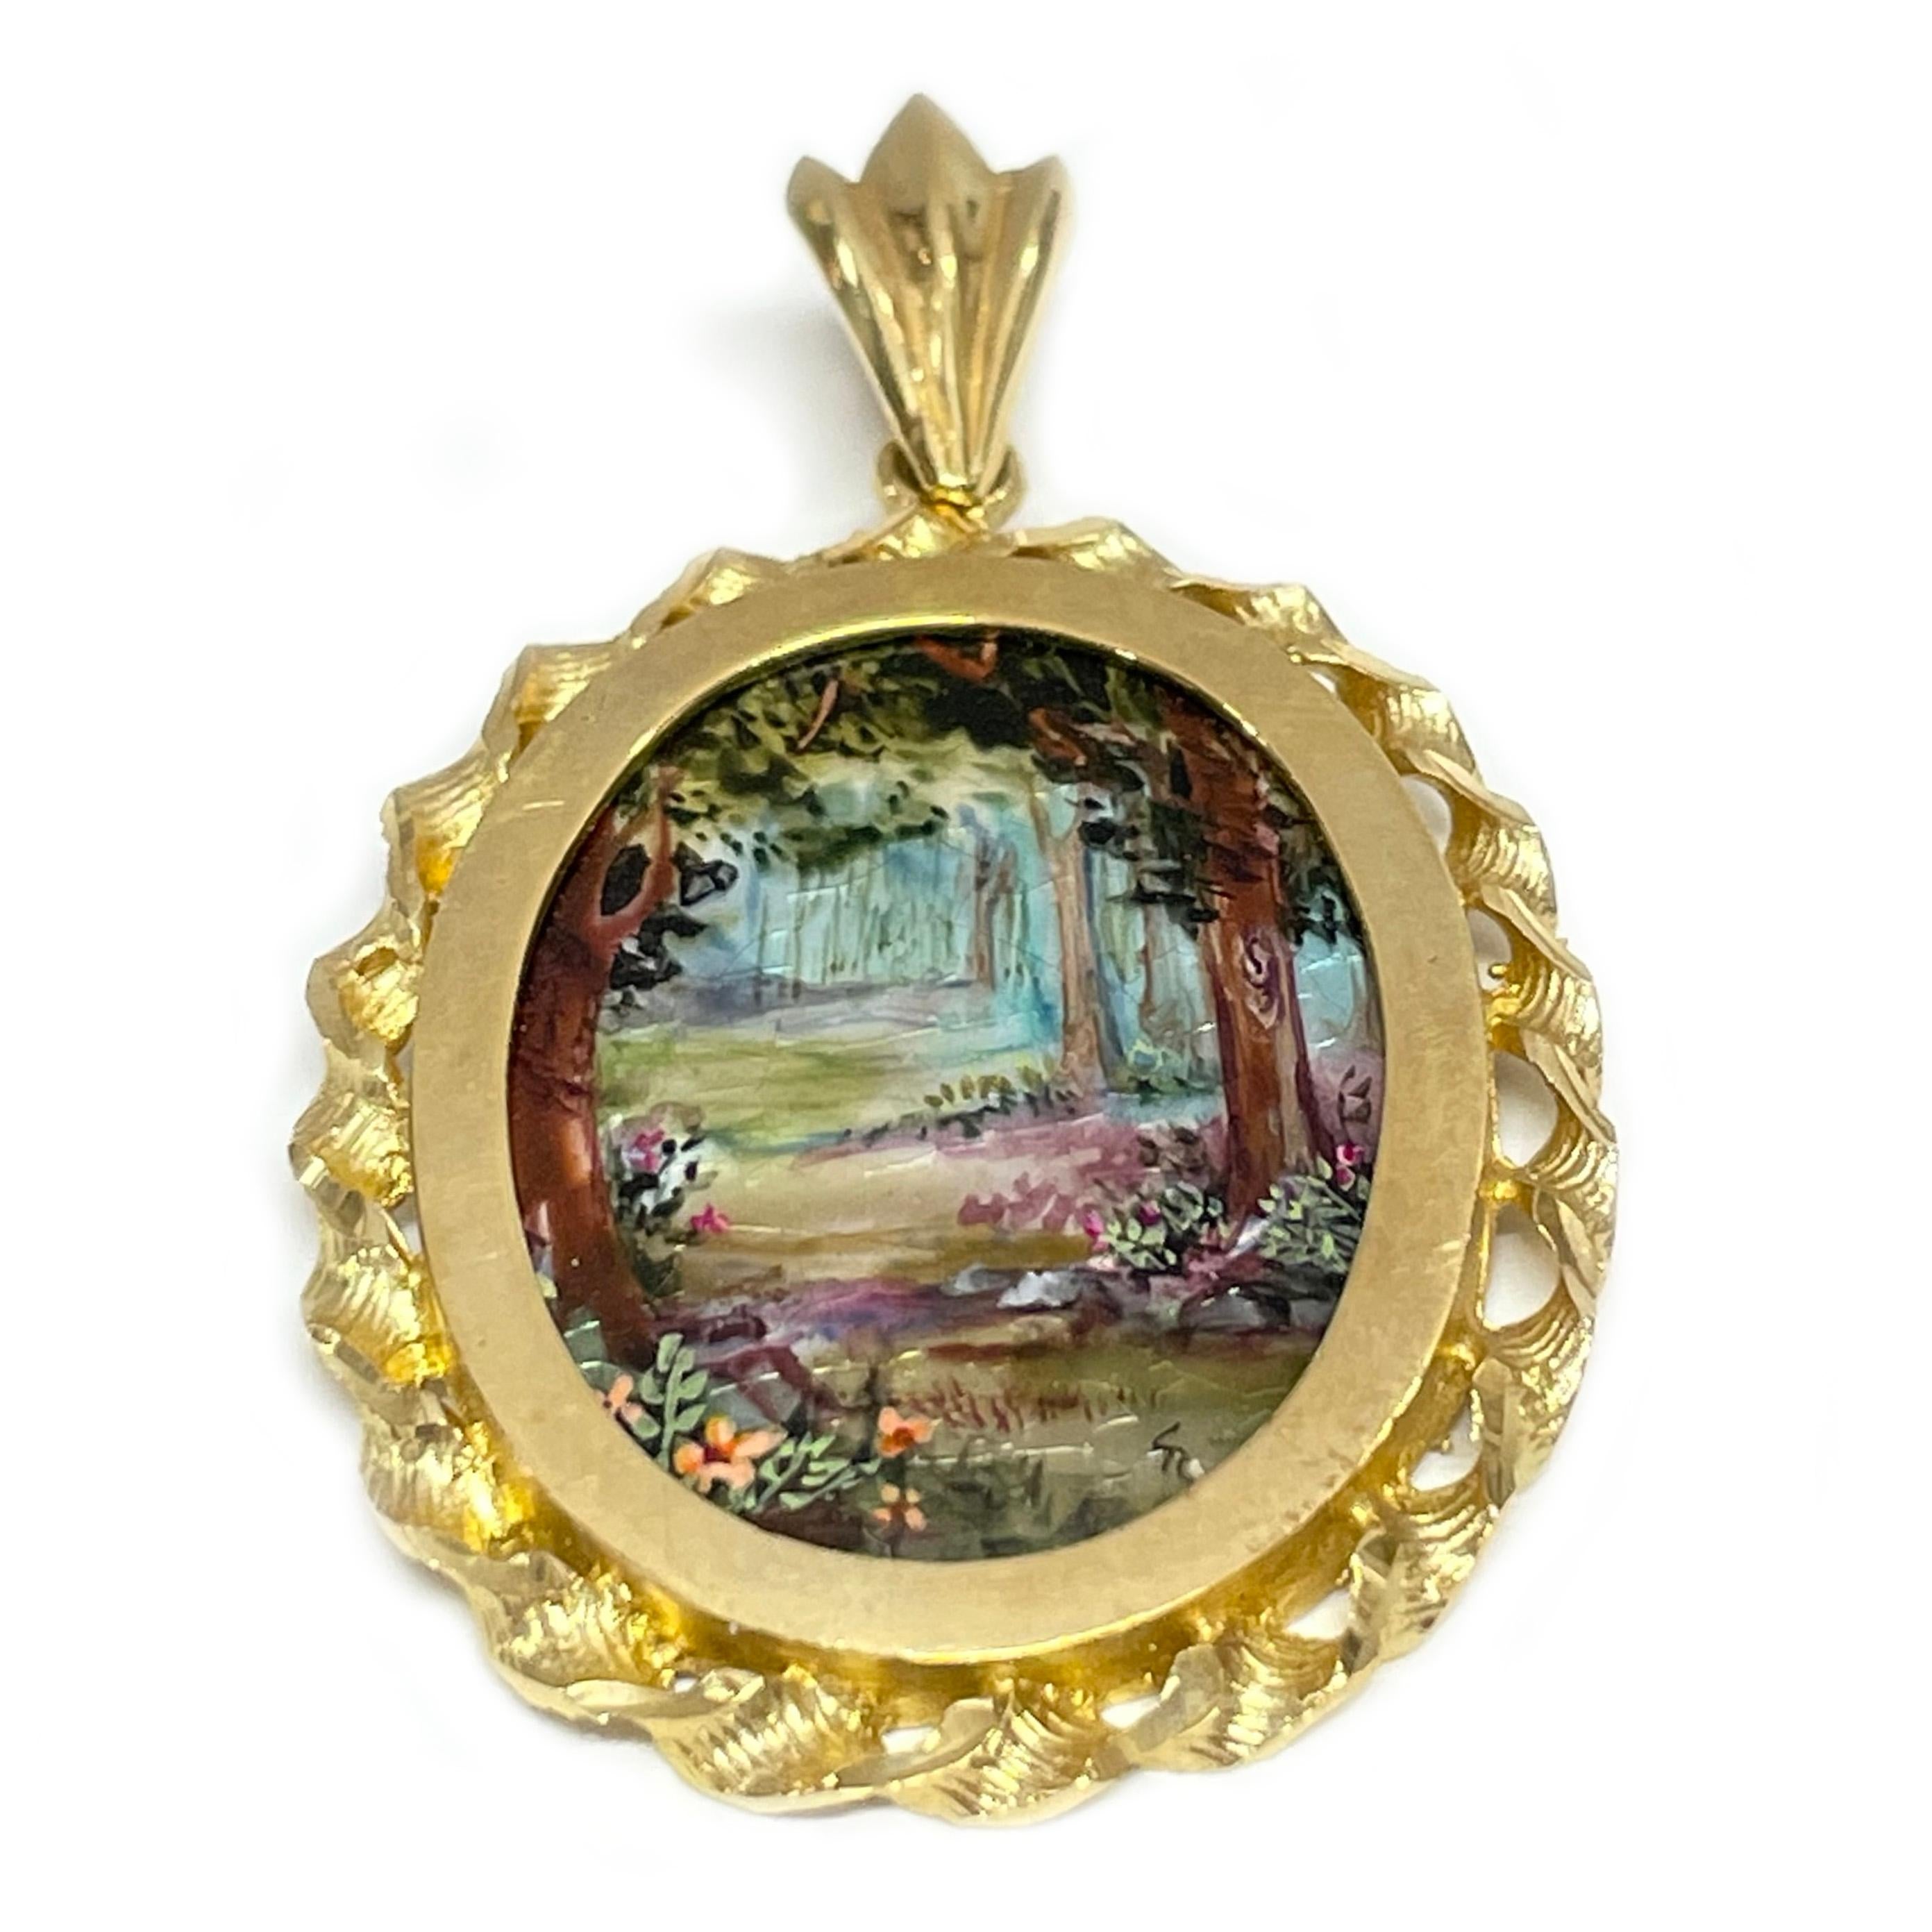 14 Karat Yellow Gold Forest Hand Painted on a Mother of Pearl Pendant. The miniature painting is set in a 14 karat gold twisted rope oval frame with diamond-cut details. The painting is signed by the master artist, CR Charlotte and includes a